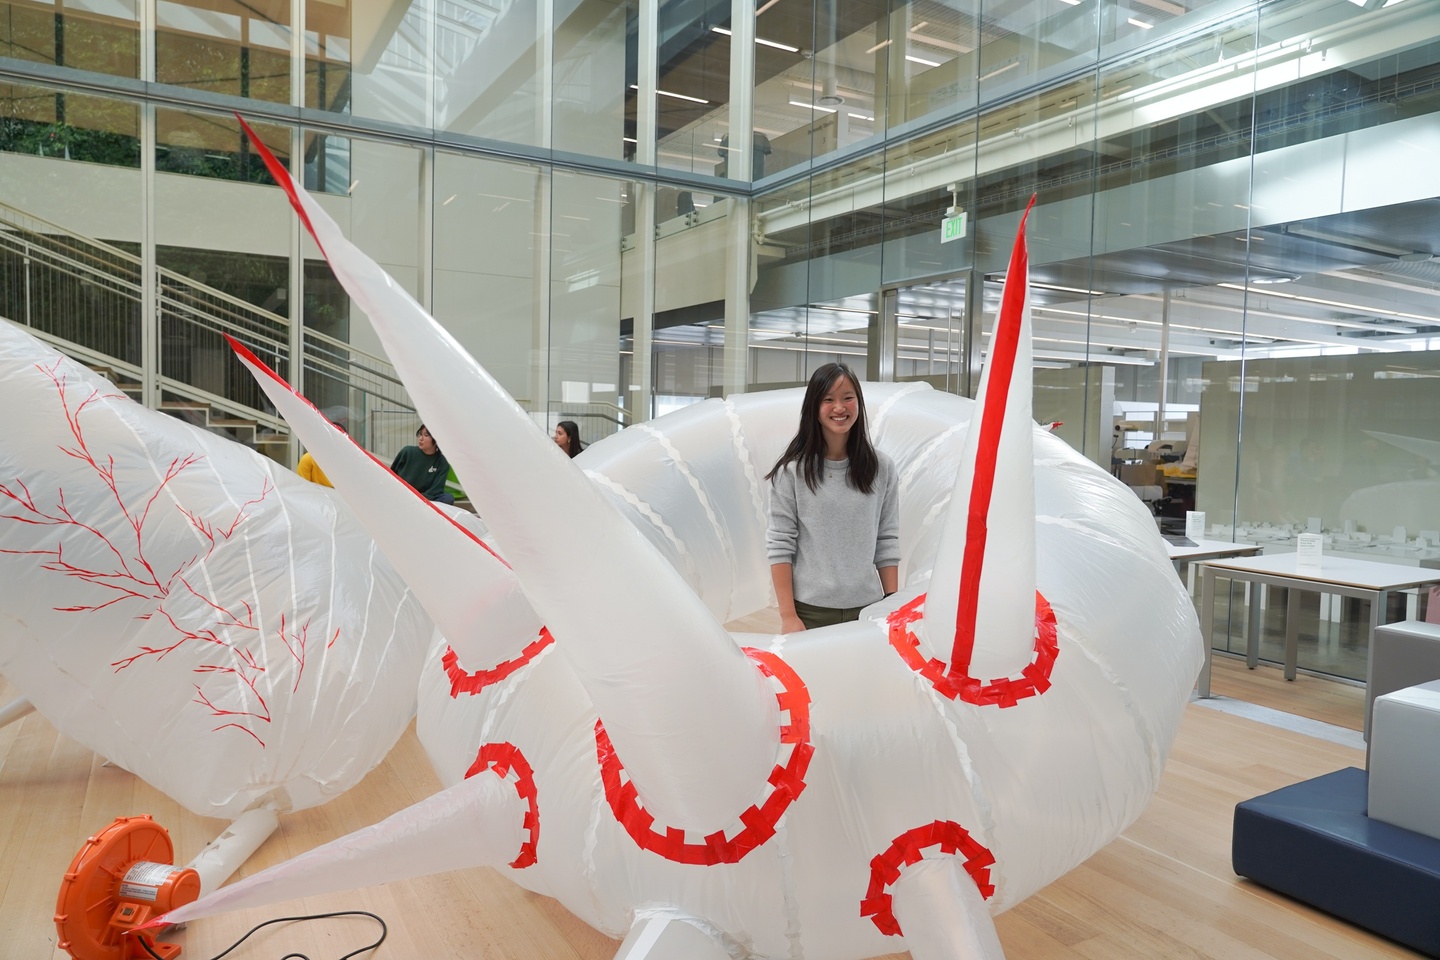 Student stands inside a giant inflatable in the shape of a donut with 5 foot long spikes protruding from it.